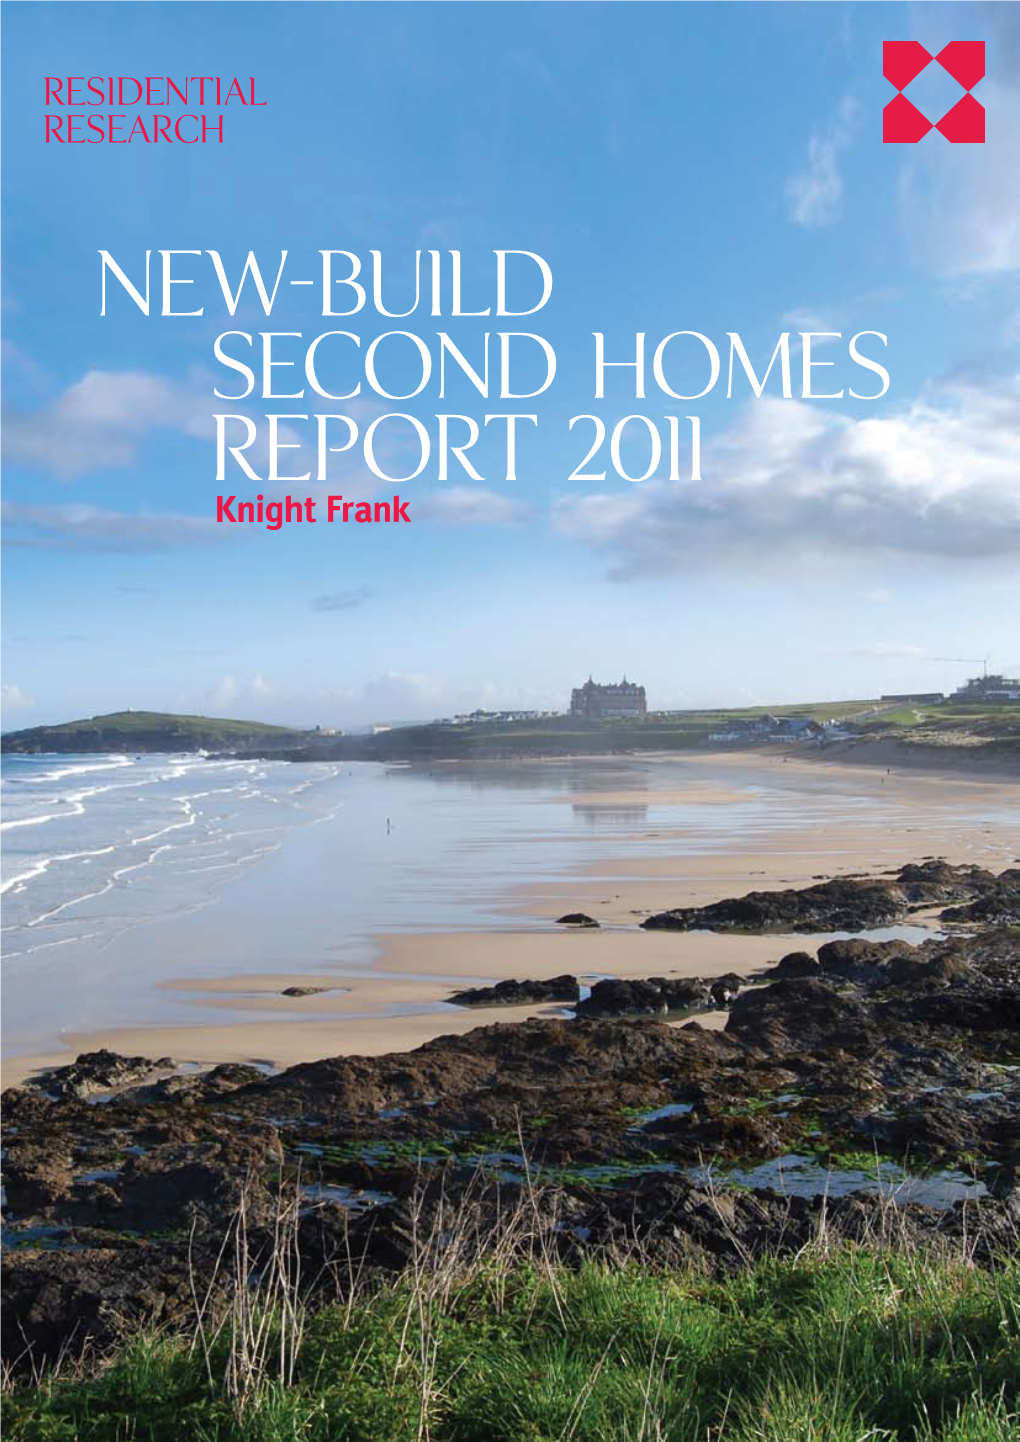 New-Build Second Homes Report 2011